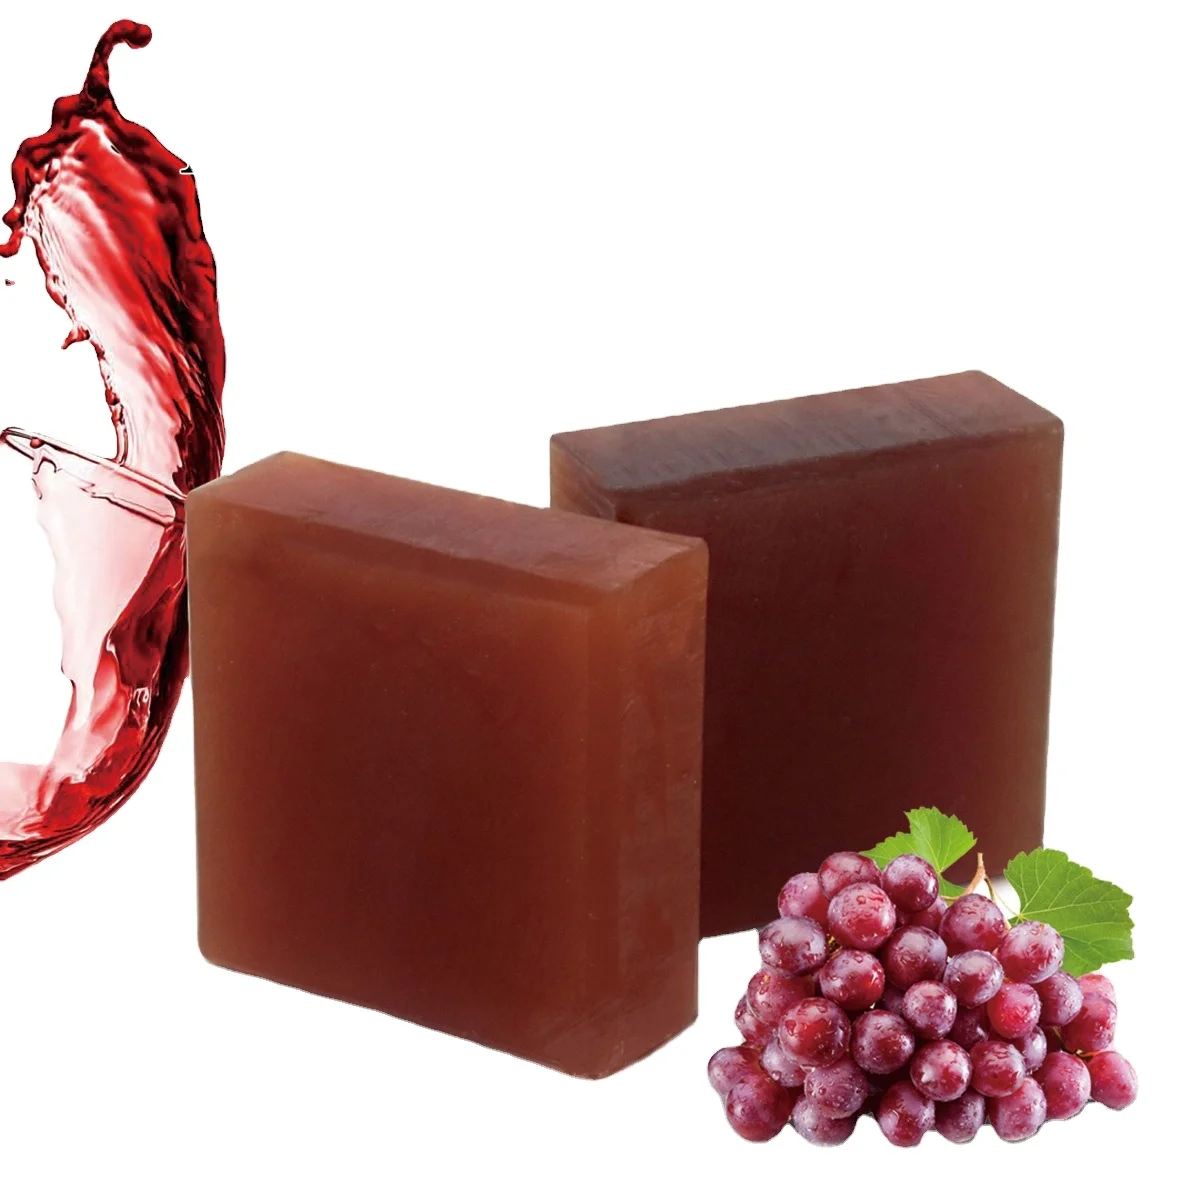 

Skincare Soap Handmade Bath Toilet Soap Amber Handmade Red Facial Cleaning Soap Natural Amber Powder Face & Body Cleaning 100g, Wine red